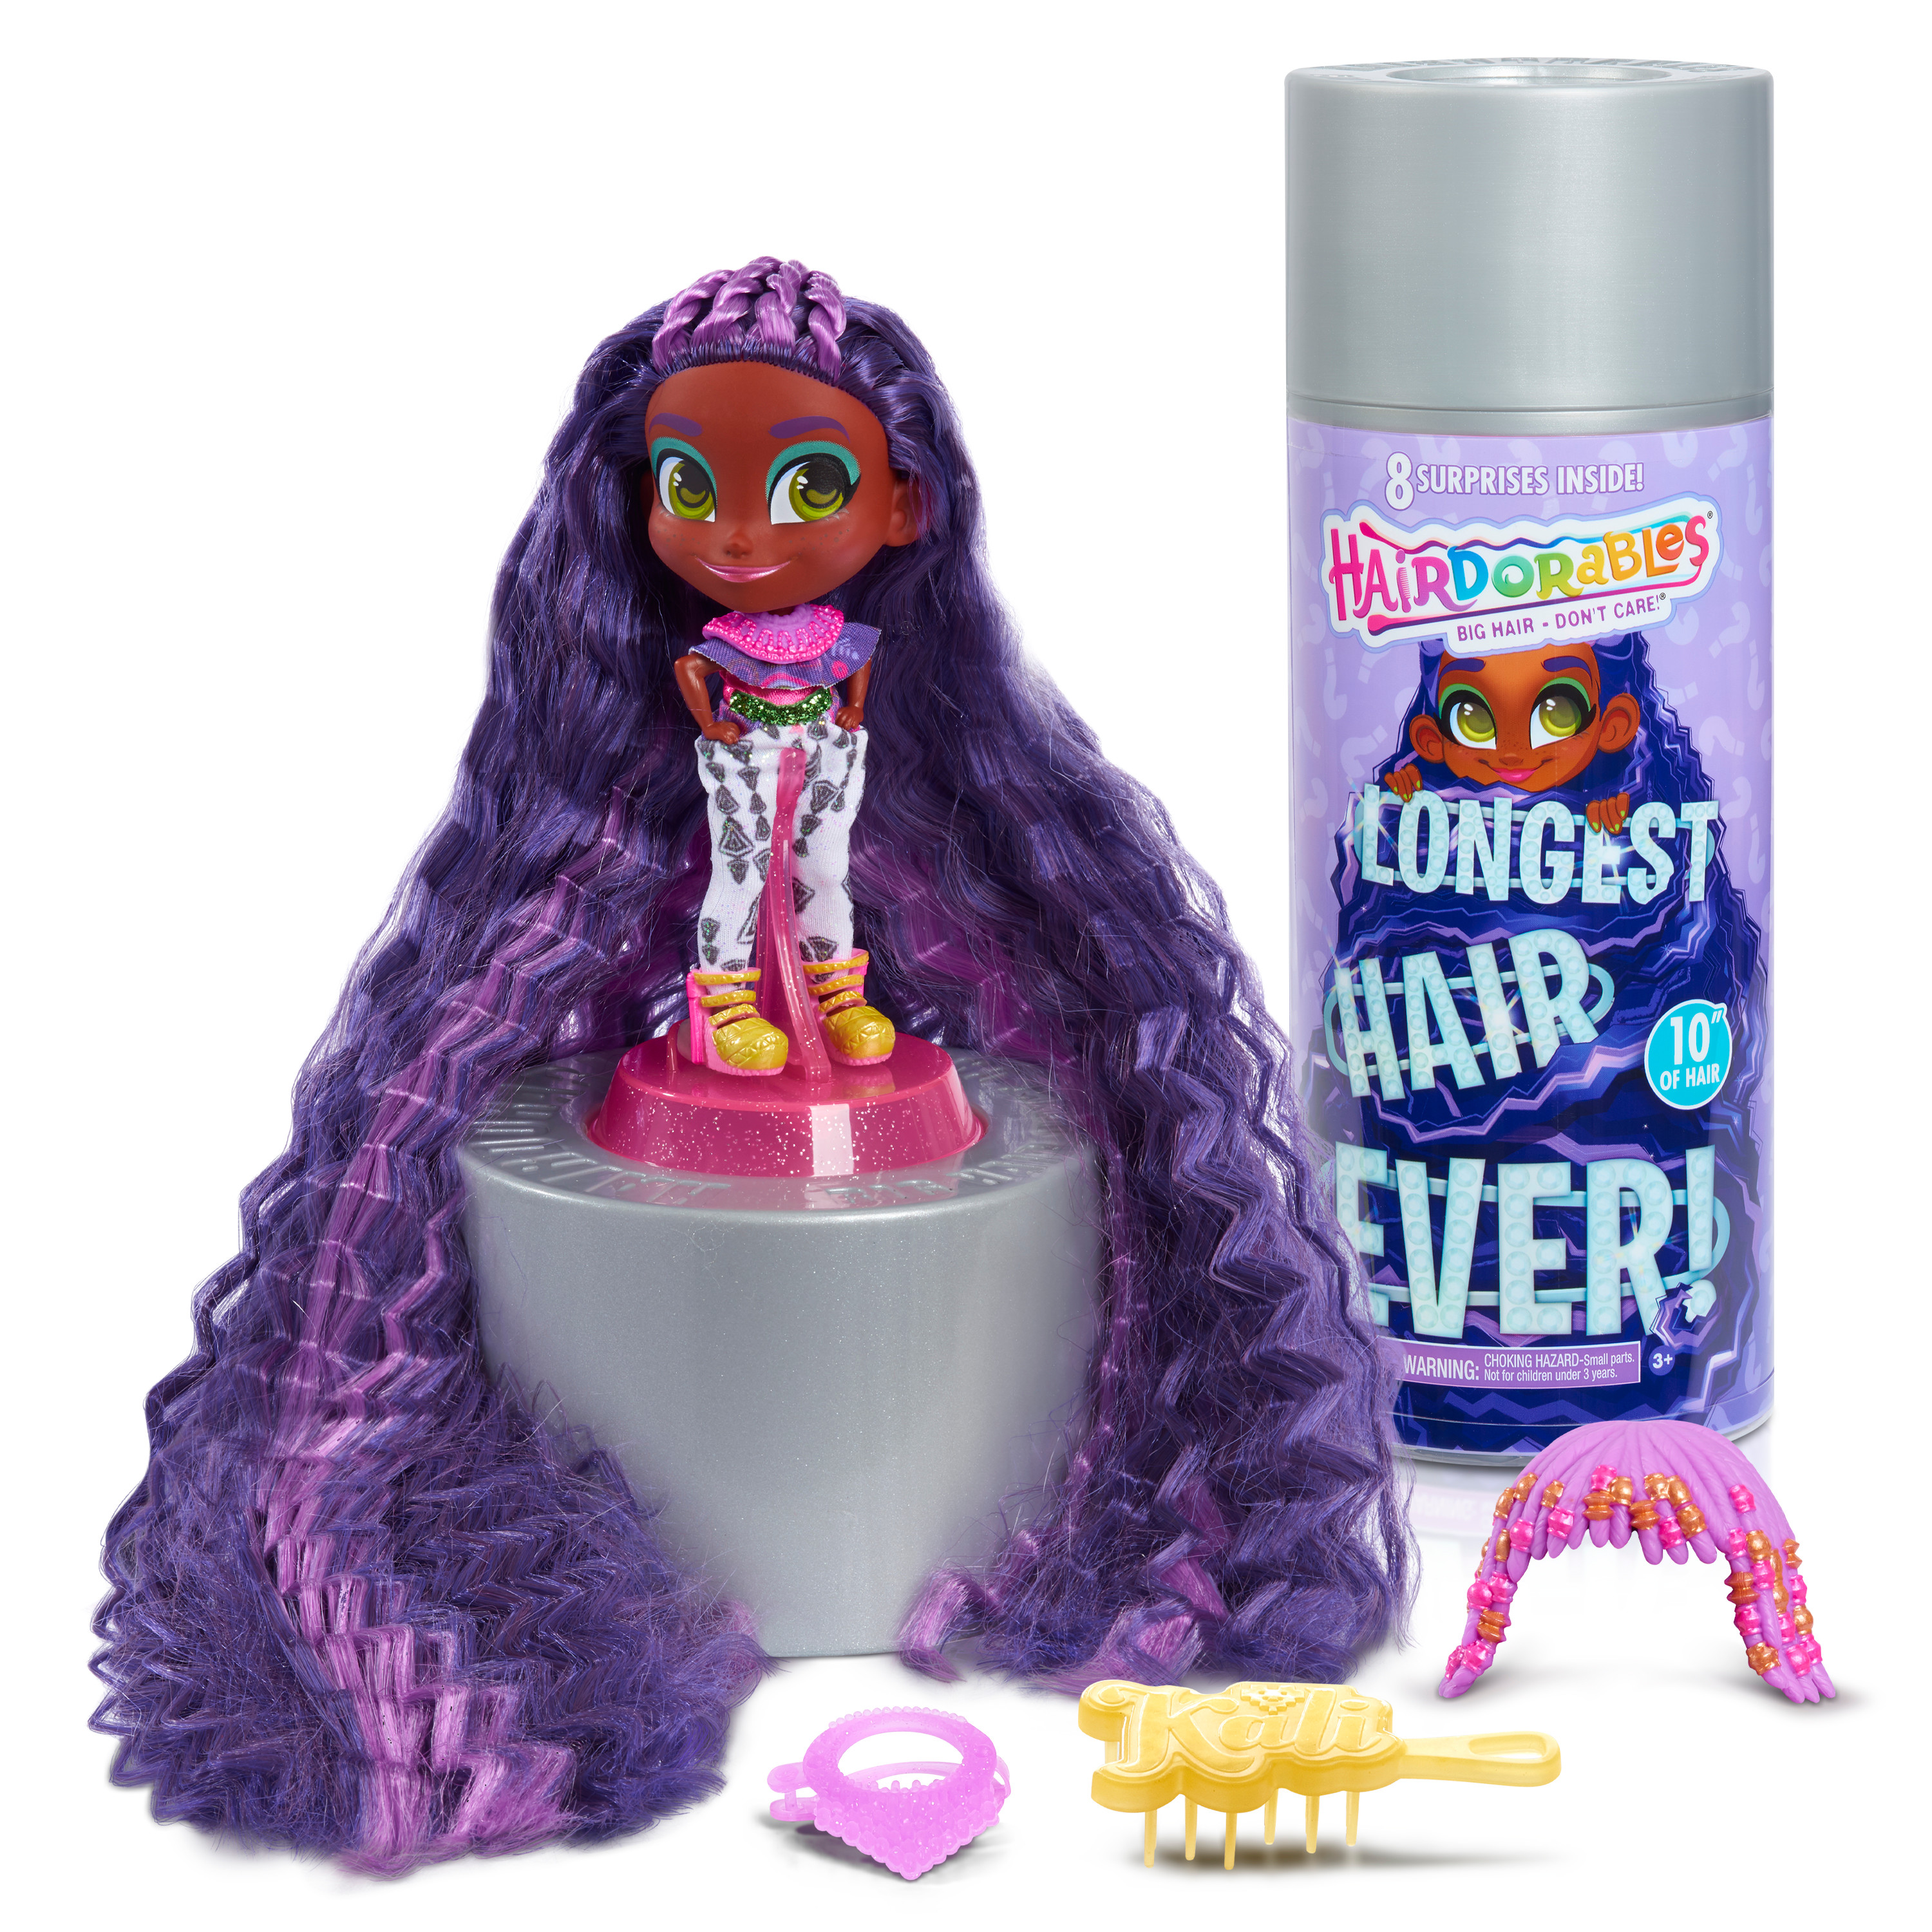 Hairdorables Longest Hair Ever! Kali, Includes 8 Surprises, 10-Inches of Hair to Style, Purple,  Kids Toys for Ages 3 Up, Gifts and Presents - image 1 of 8